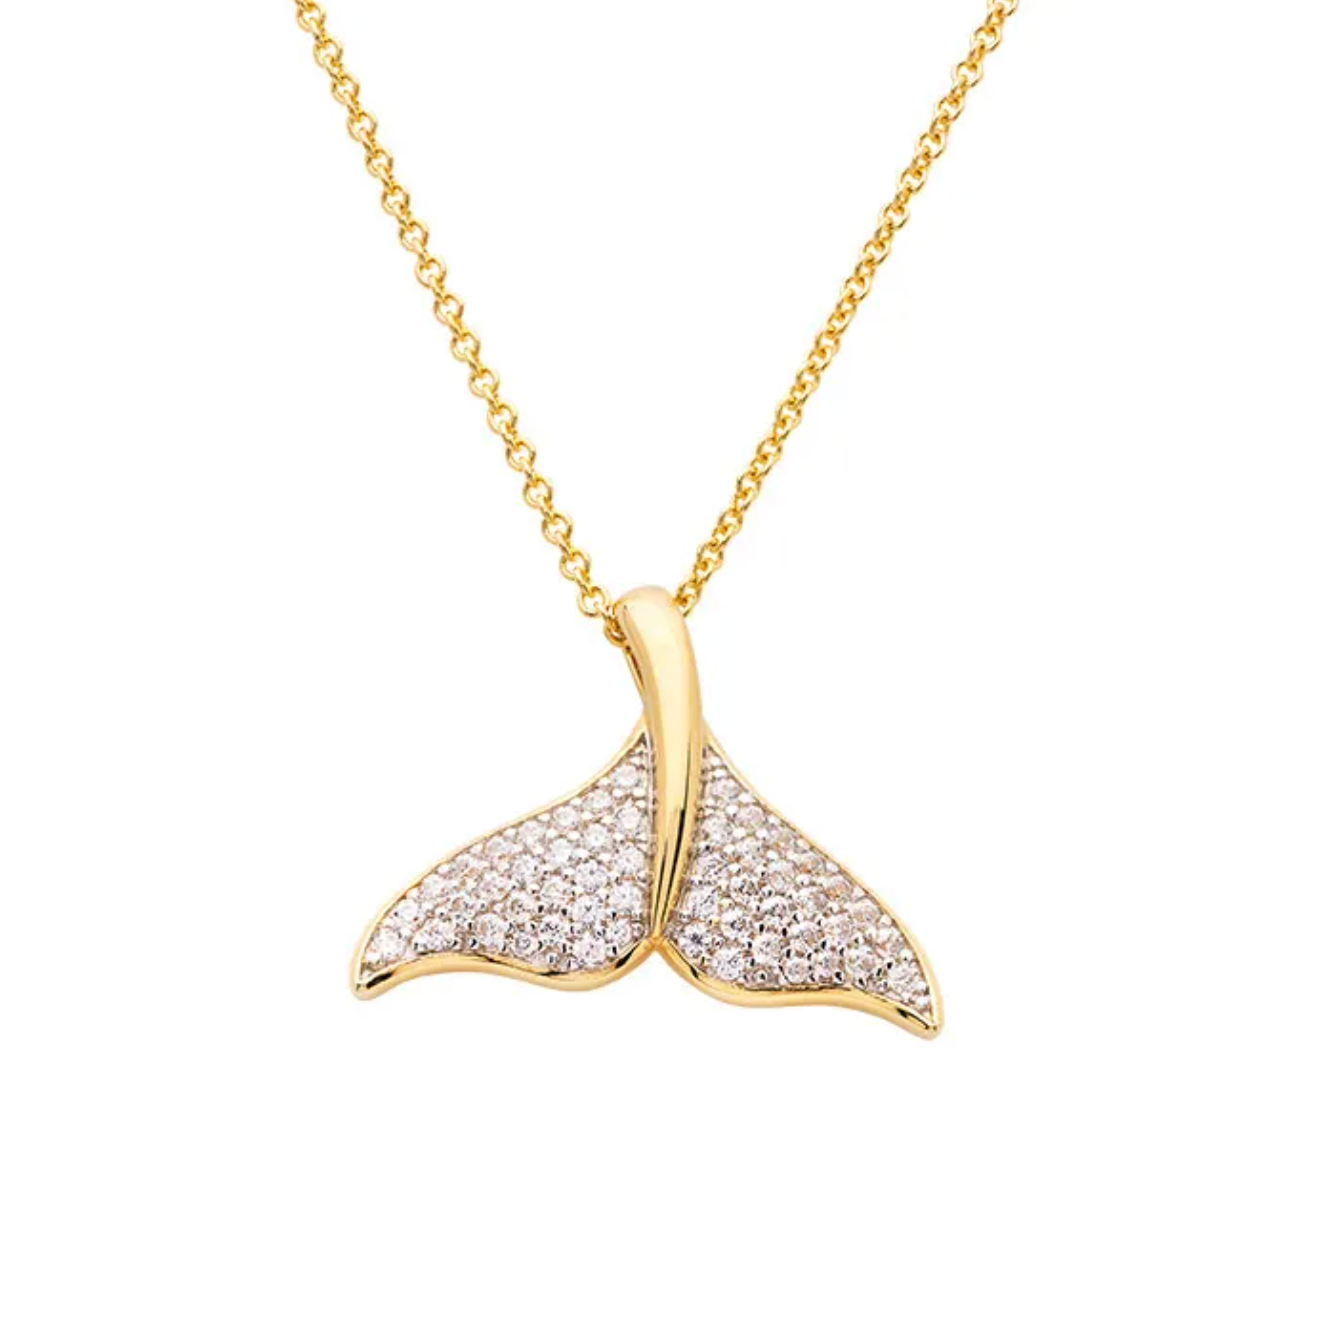 14K Gold Vermeil Whale Tail Necklace with Cubic Zirconias